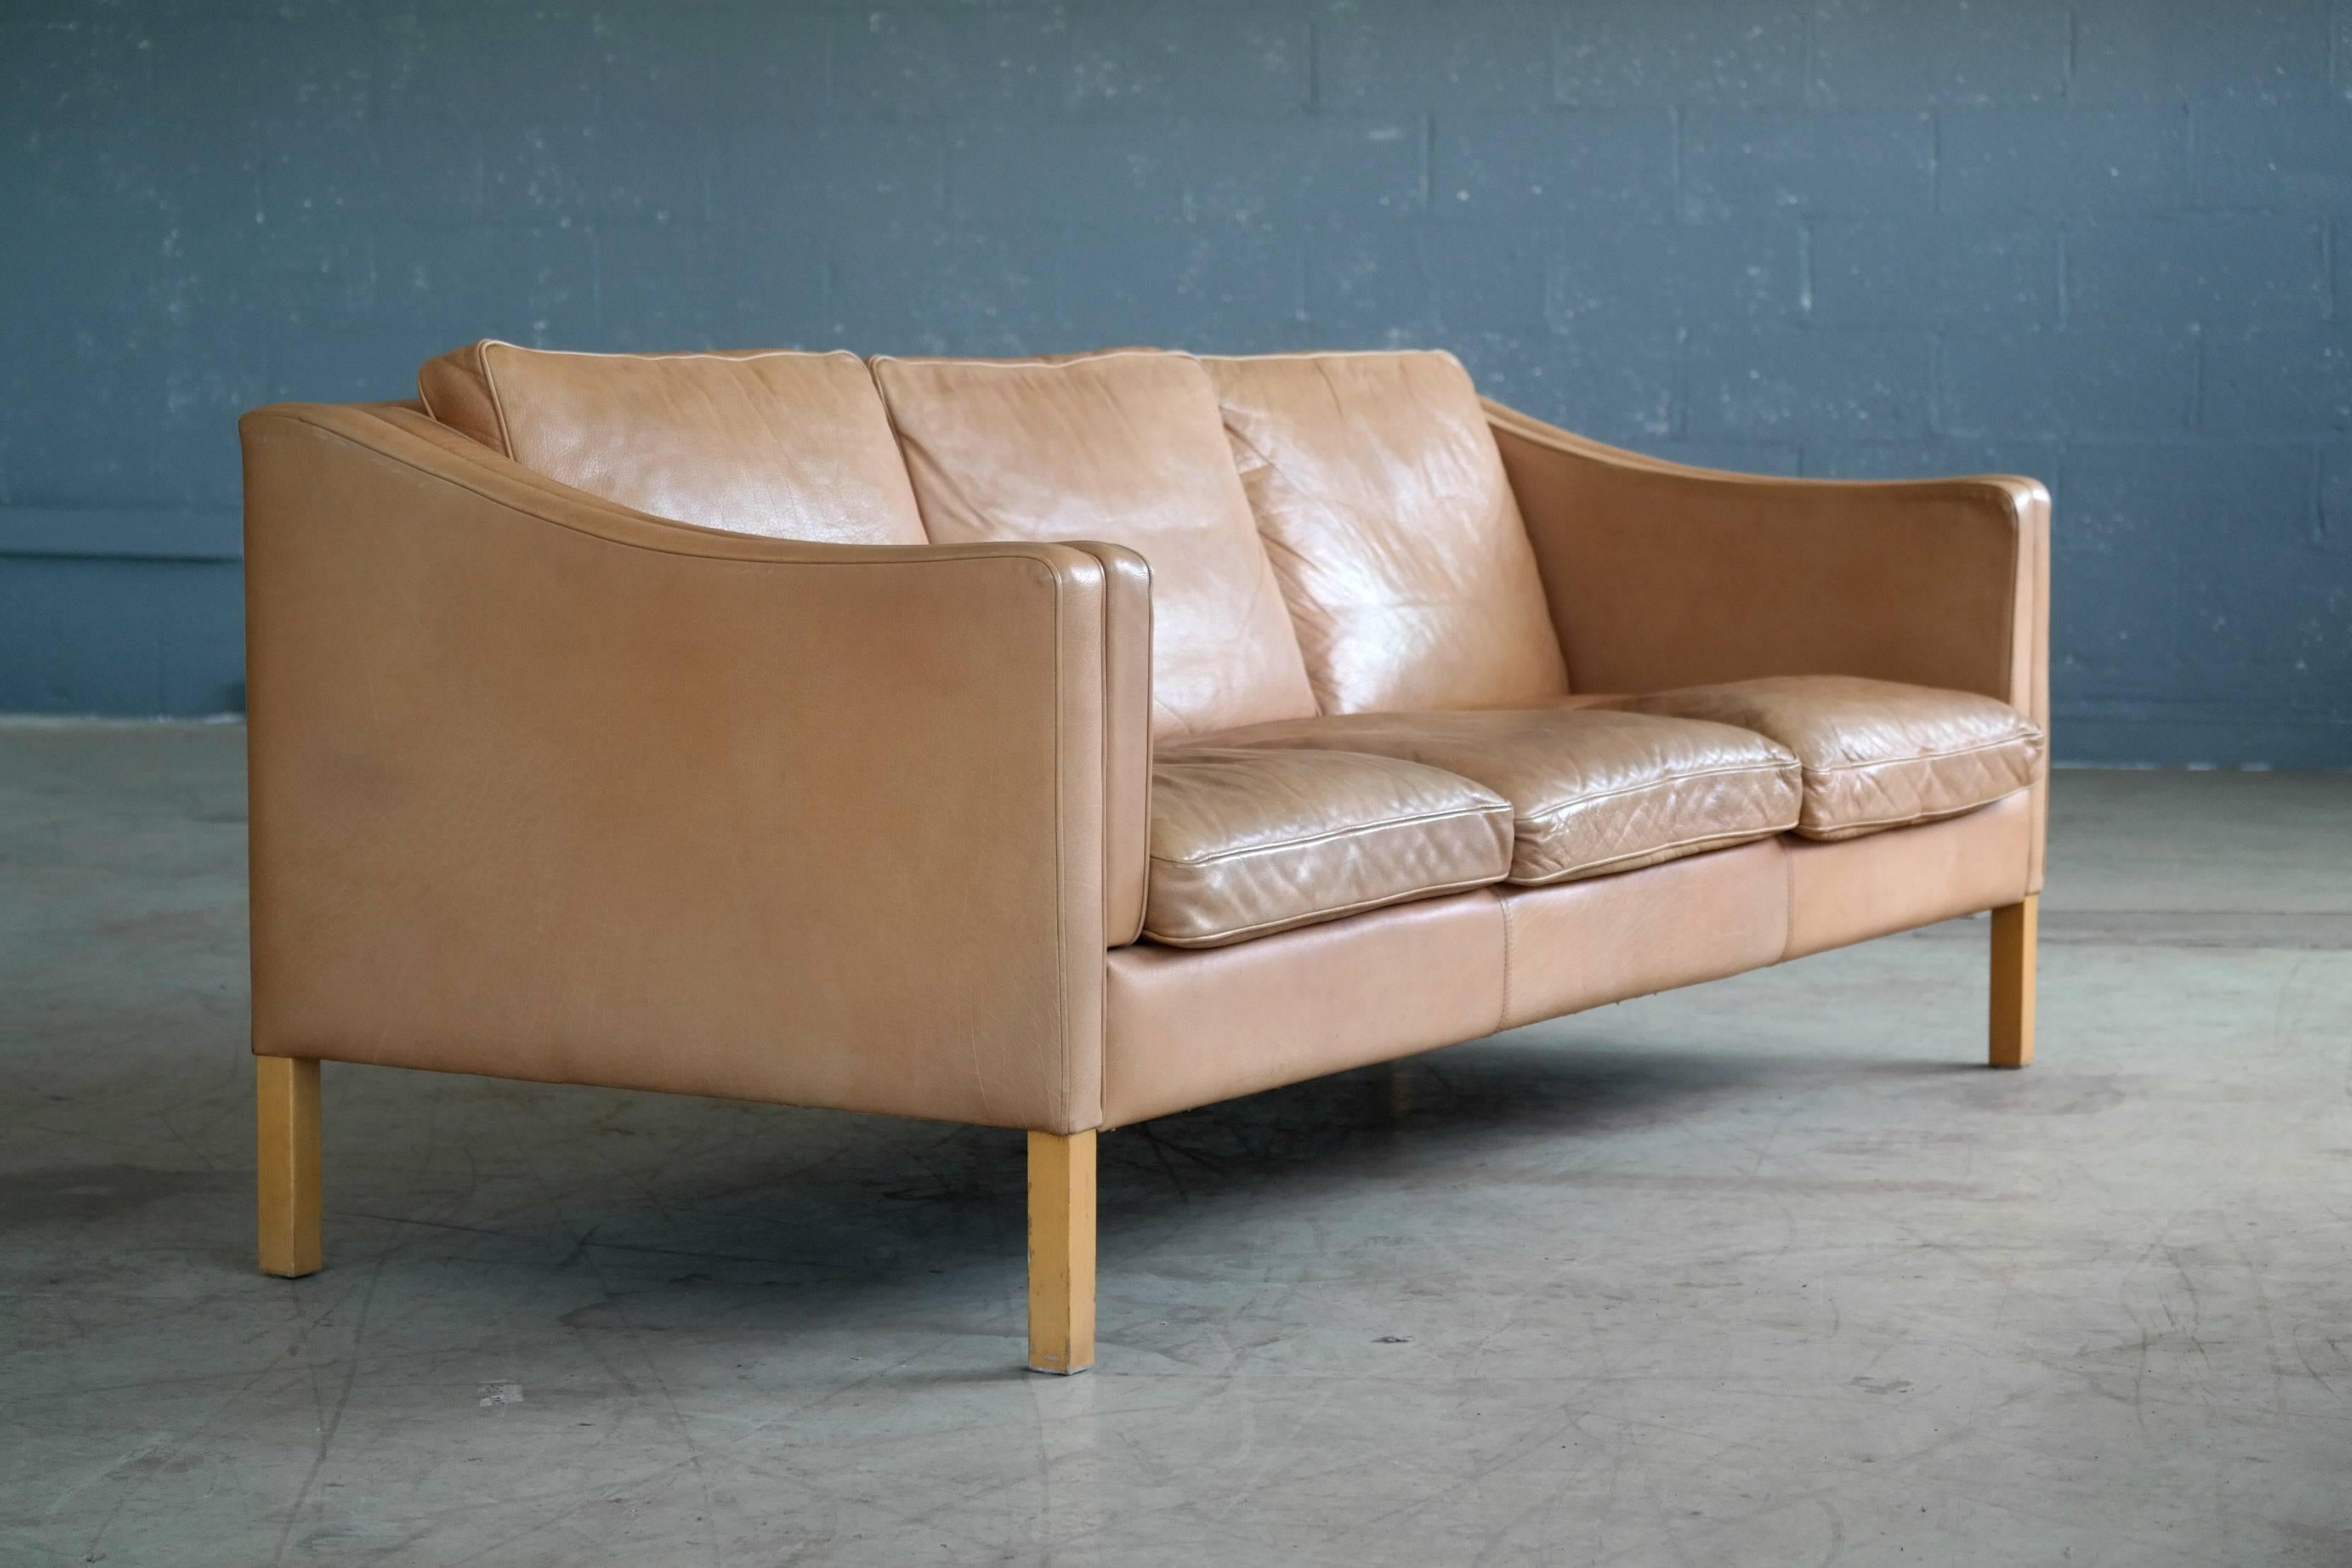 Mid-Century Modern Børge Mogensen Style Three-Seat Sofa Model 2213 in Tan Leather by Stouby Mobler